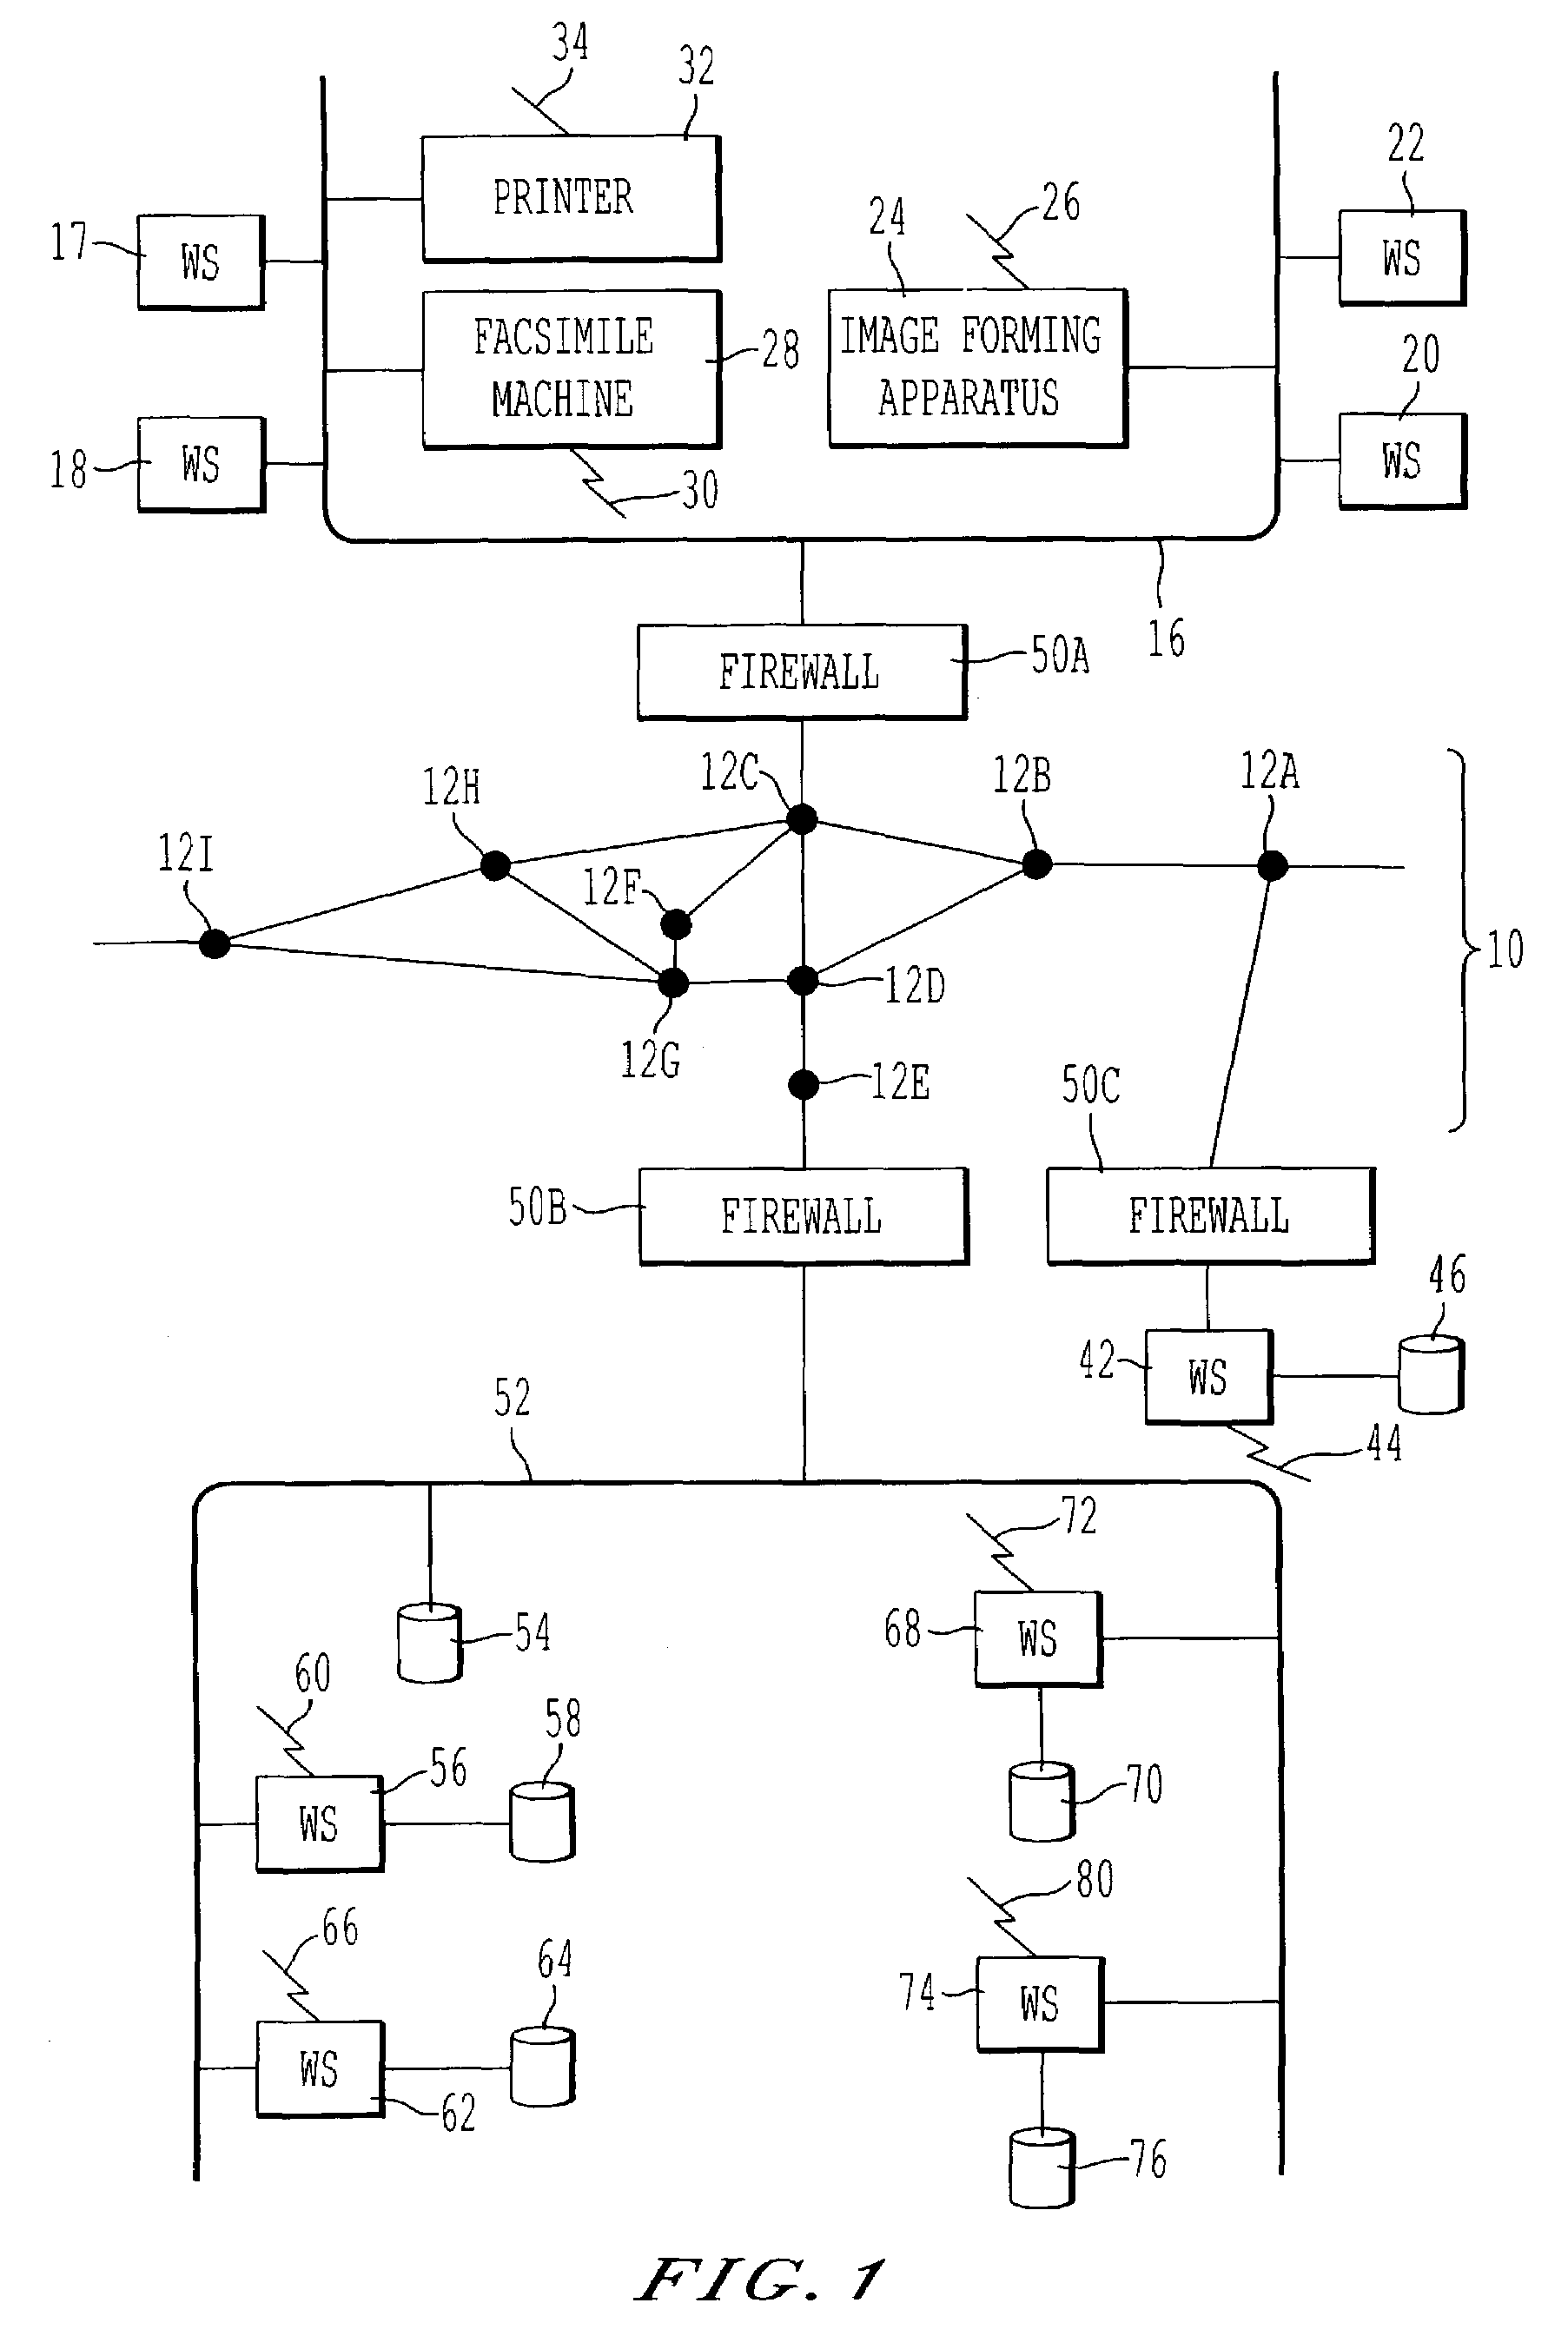 Method and system for using internal data structures for storing information related to remotely monitored devices